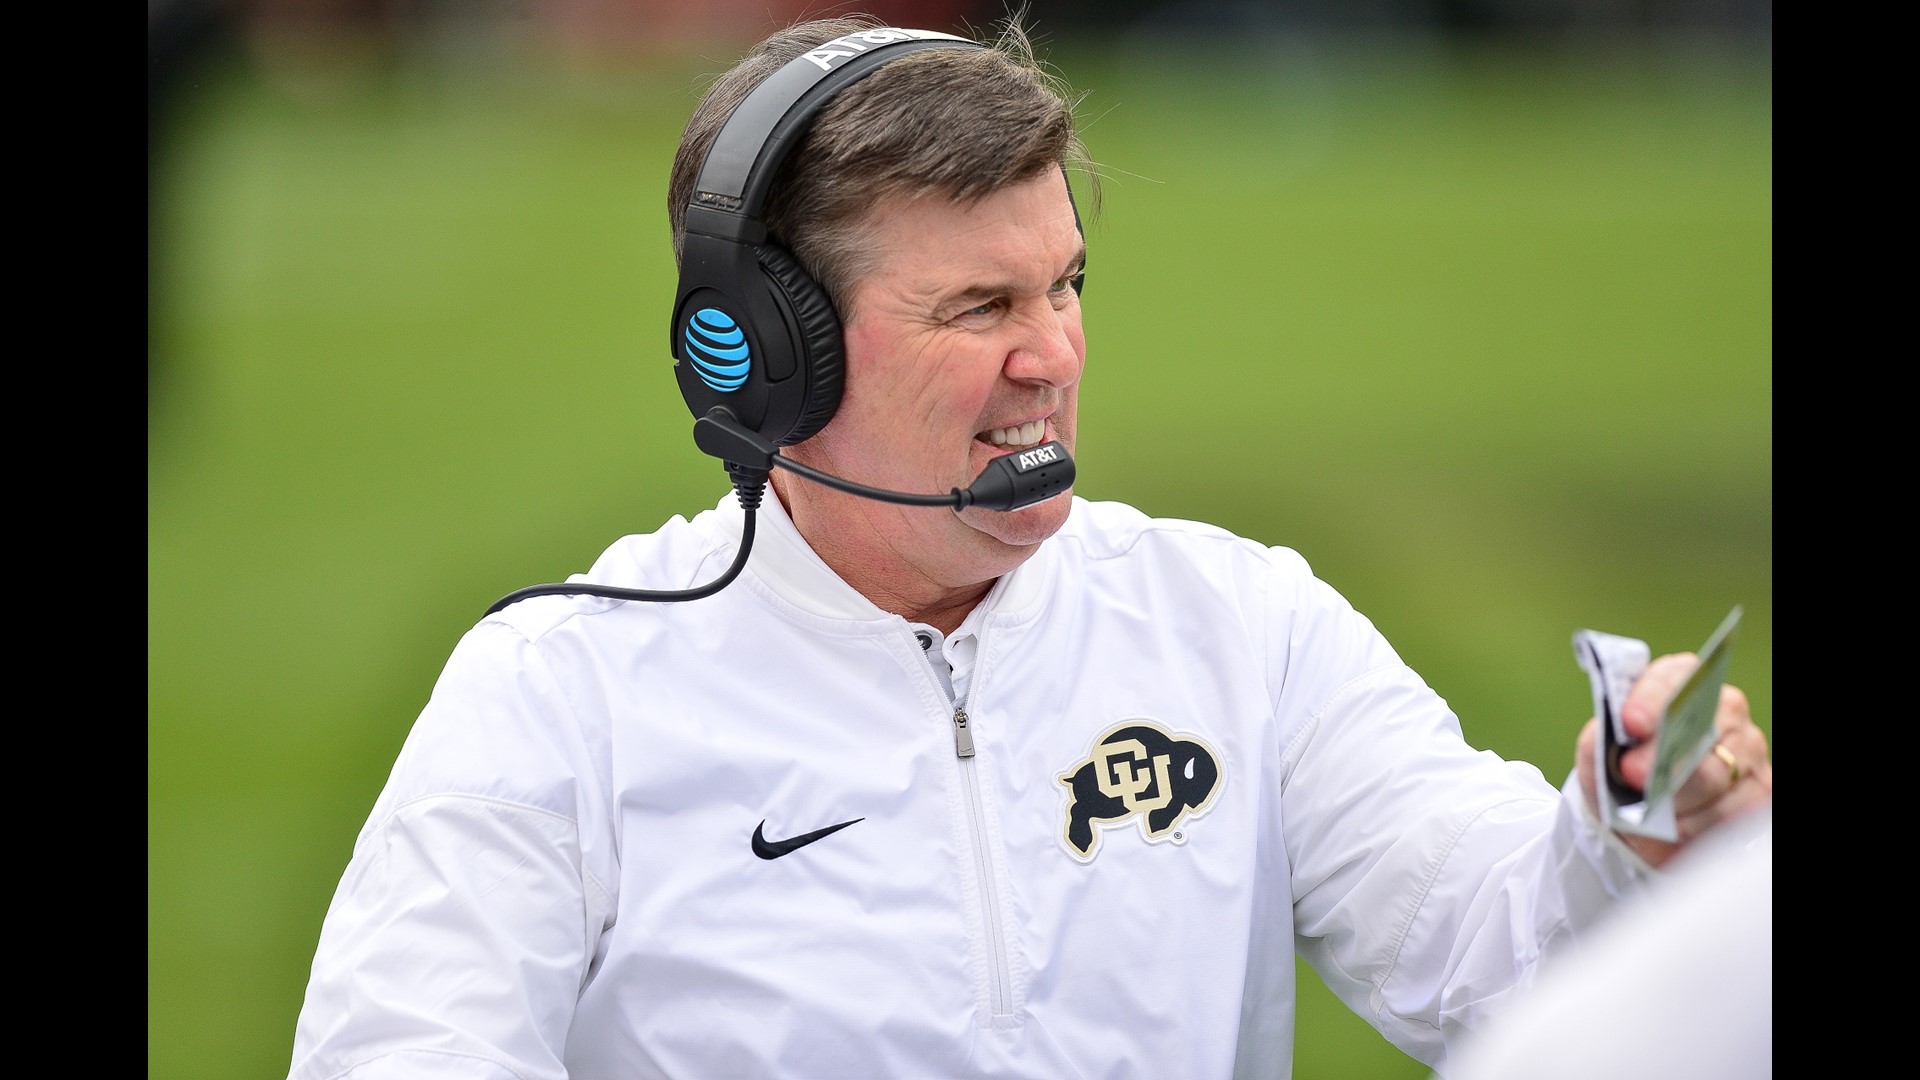 Colorados Best Paid Public Employee Is Cus Coach Macintyre Says Espn Report 7553